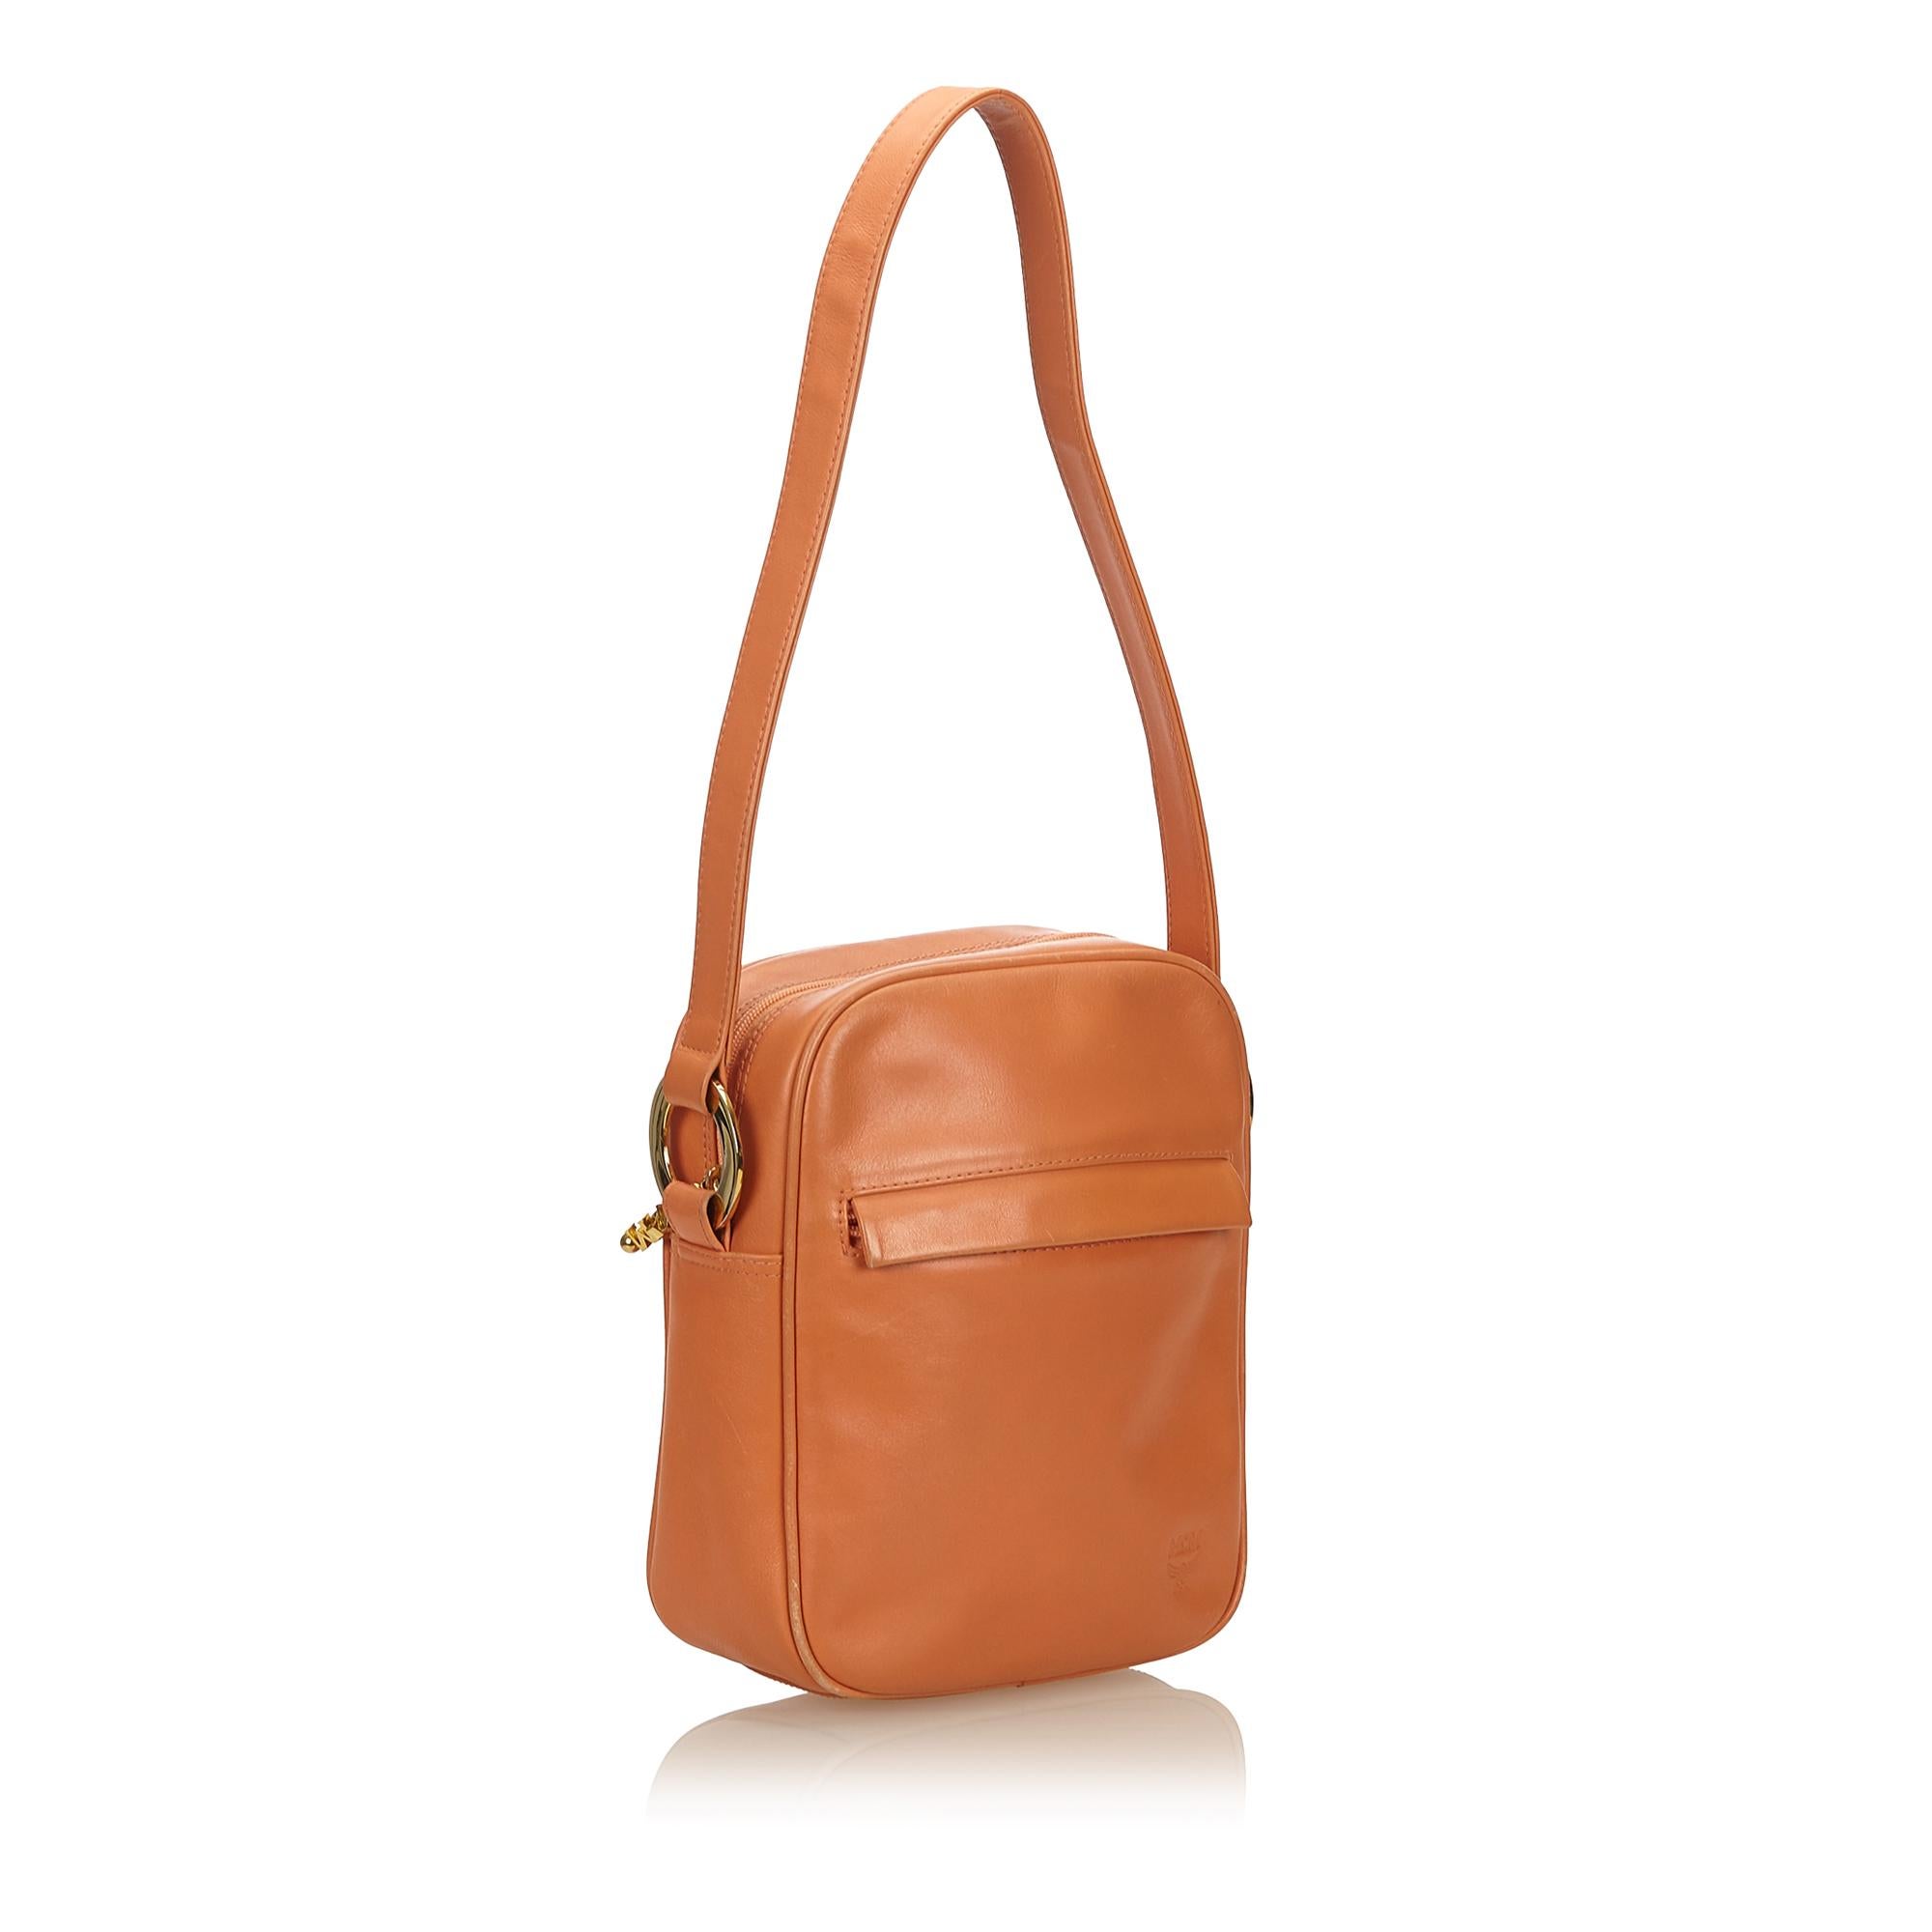 This shoulder bag features a leather body, flat strap, top zip closure, exterior zip pocket, and interior zip pocket. It carries as B condition rating.

Inclusions: 
This item does not come with inclusions.

Dimensions:
Length: 24.00 cm
Width: 20.00